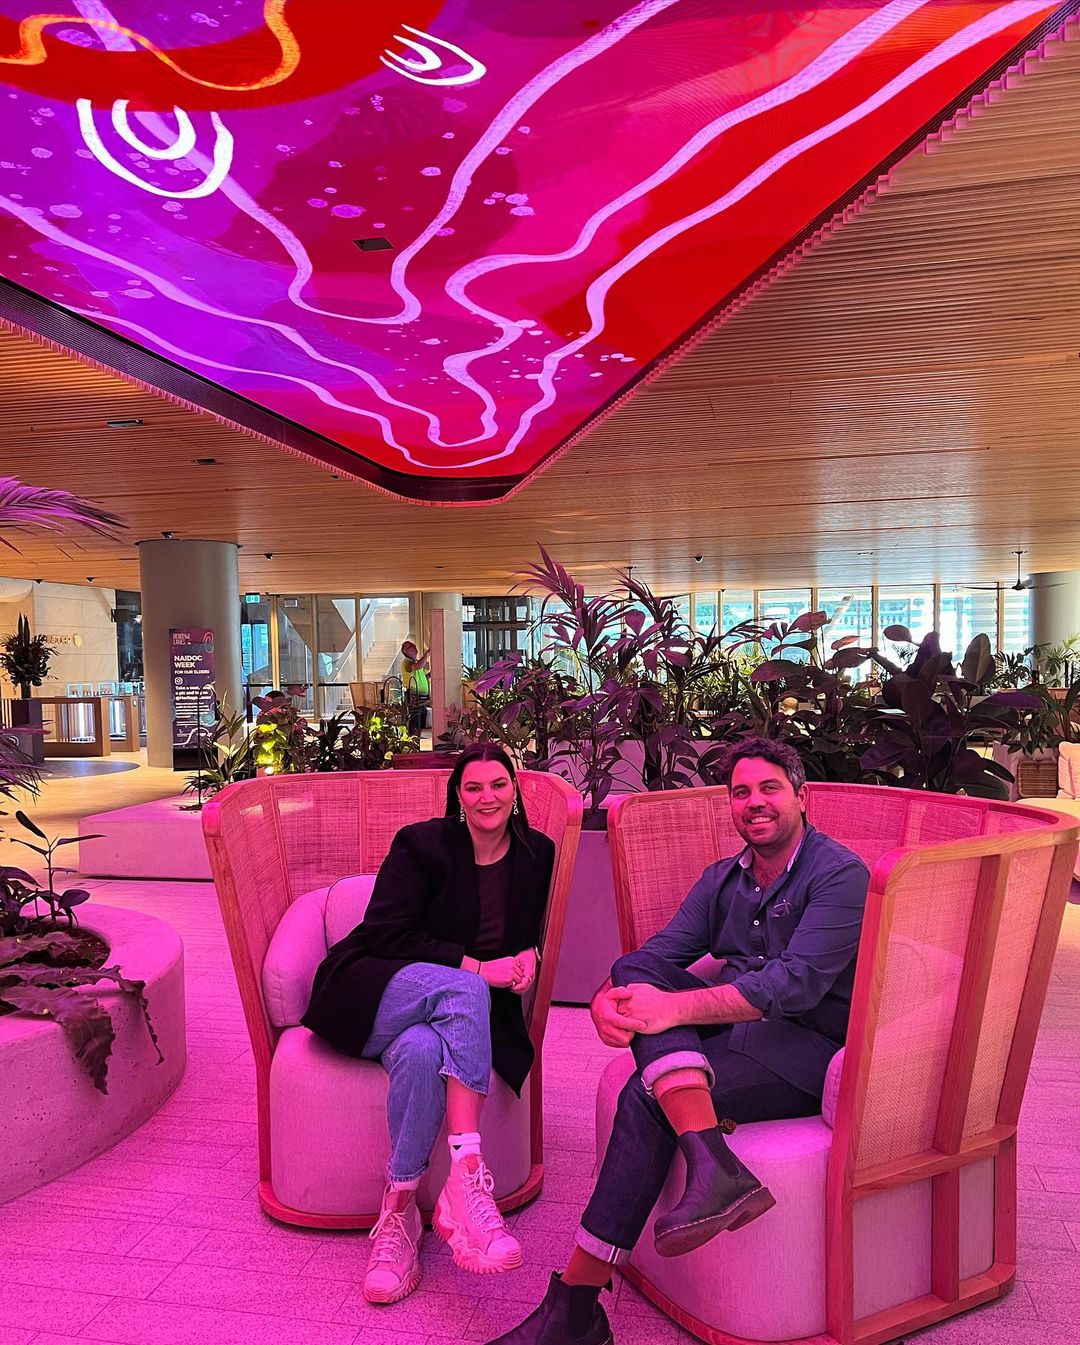 Two people sitting on contemporary under a digital art screen in a commercial lobby